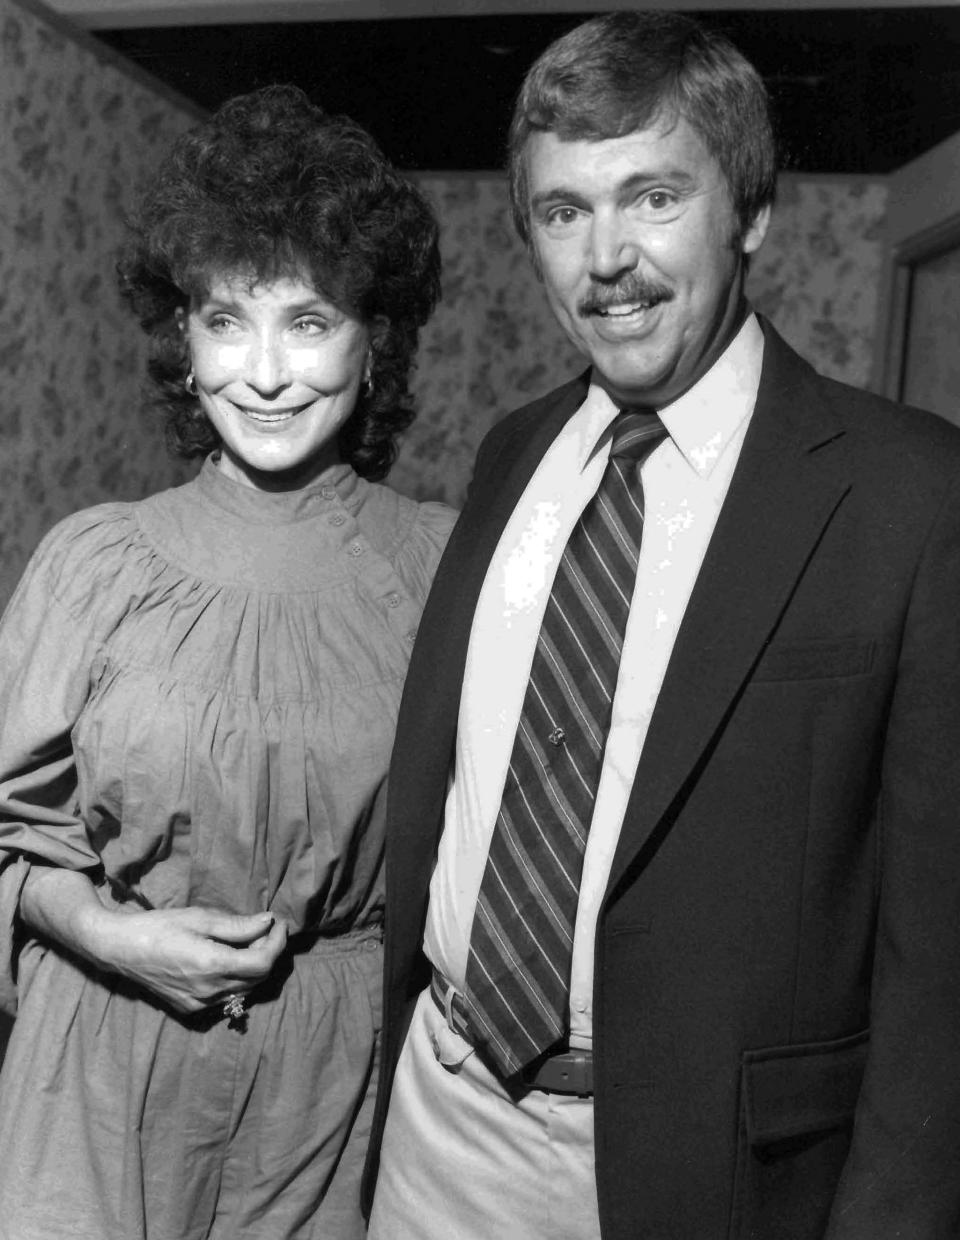 In this undated photo, journalist Joe Edwards poses with entertainer Loretta Lynn. Edwards, who chronicled Tennessee news for more than 40 years as a newsman for The Associated Press and helped “Rocky Top” become a state song, died Friday, Feb. 3, 2023. He was 75. (AP Photo/Mark Humphrey)